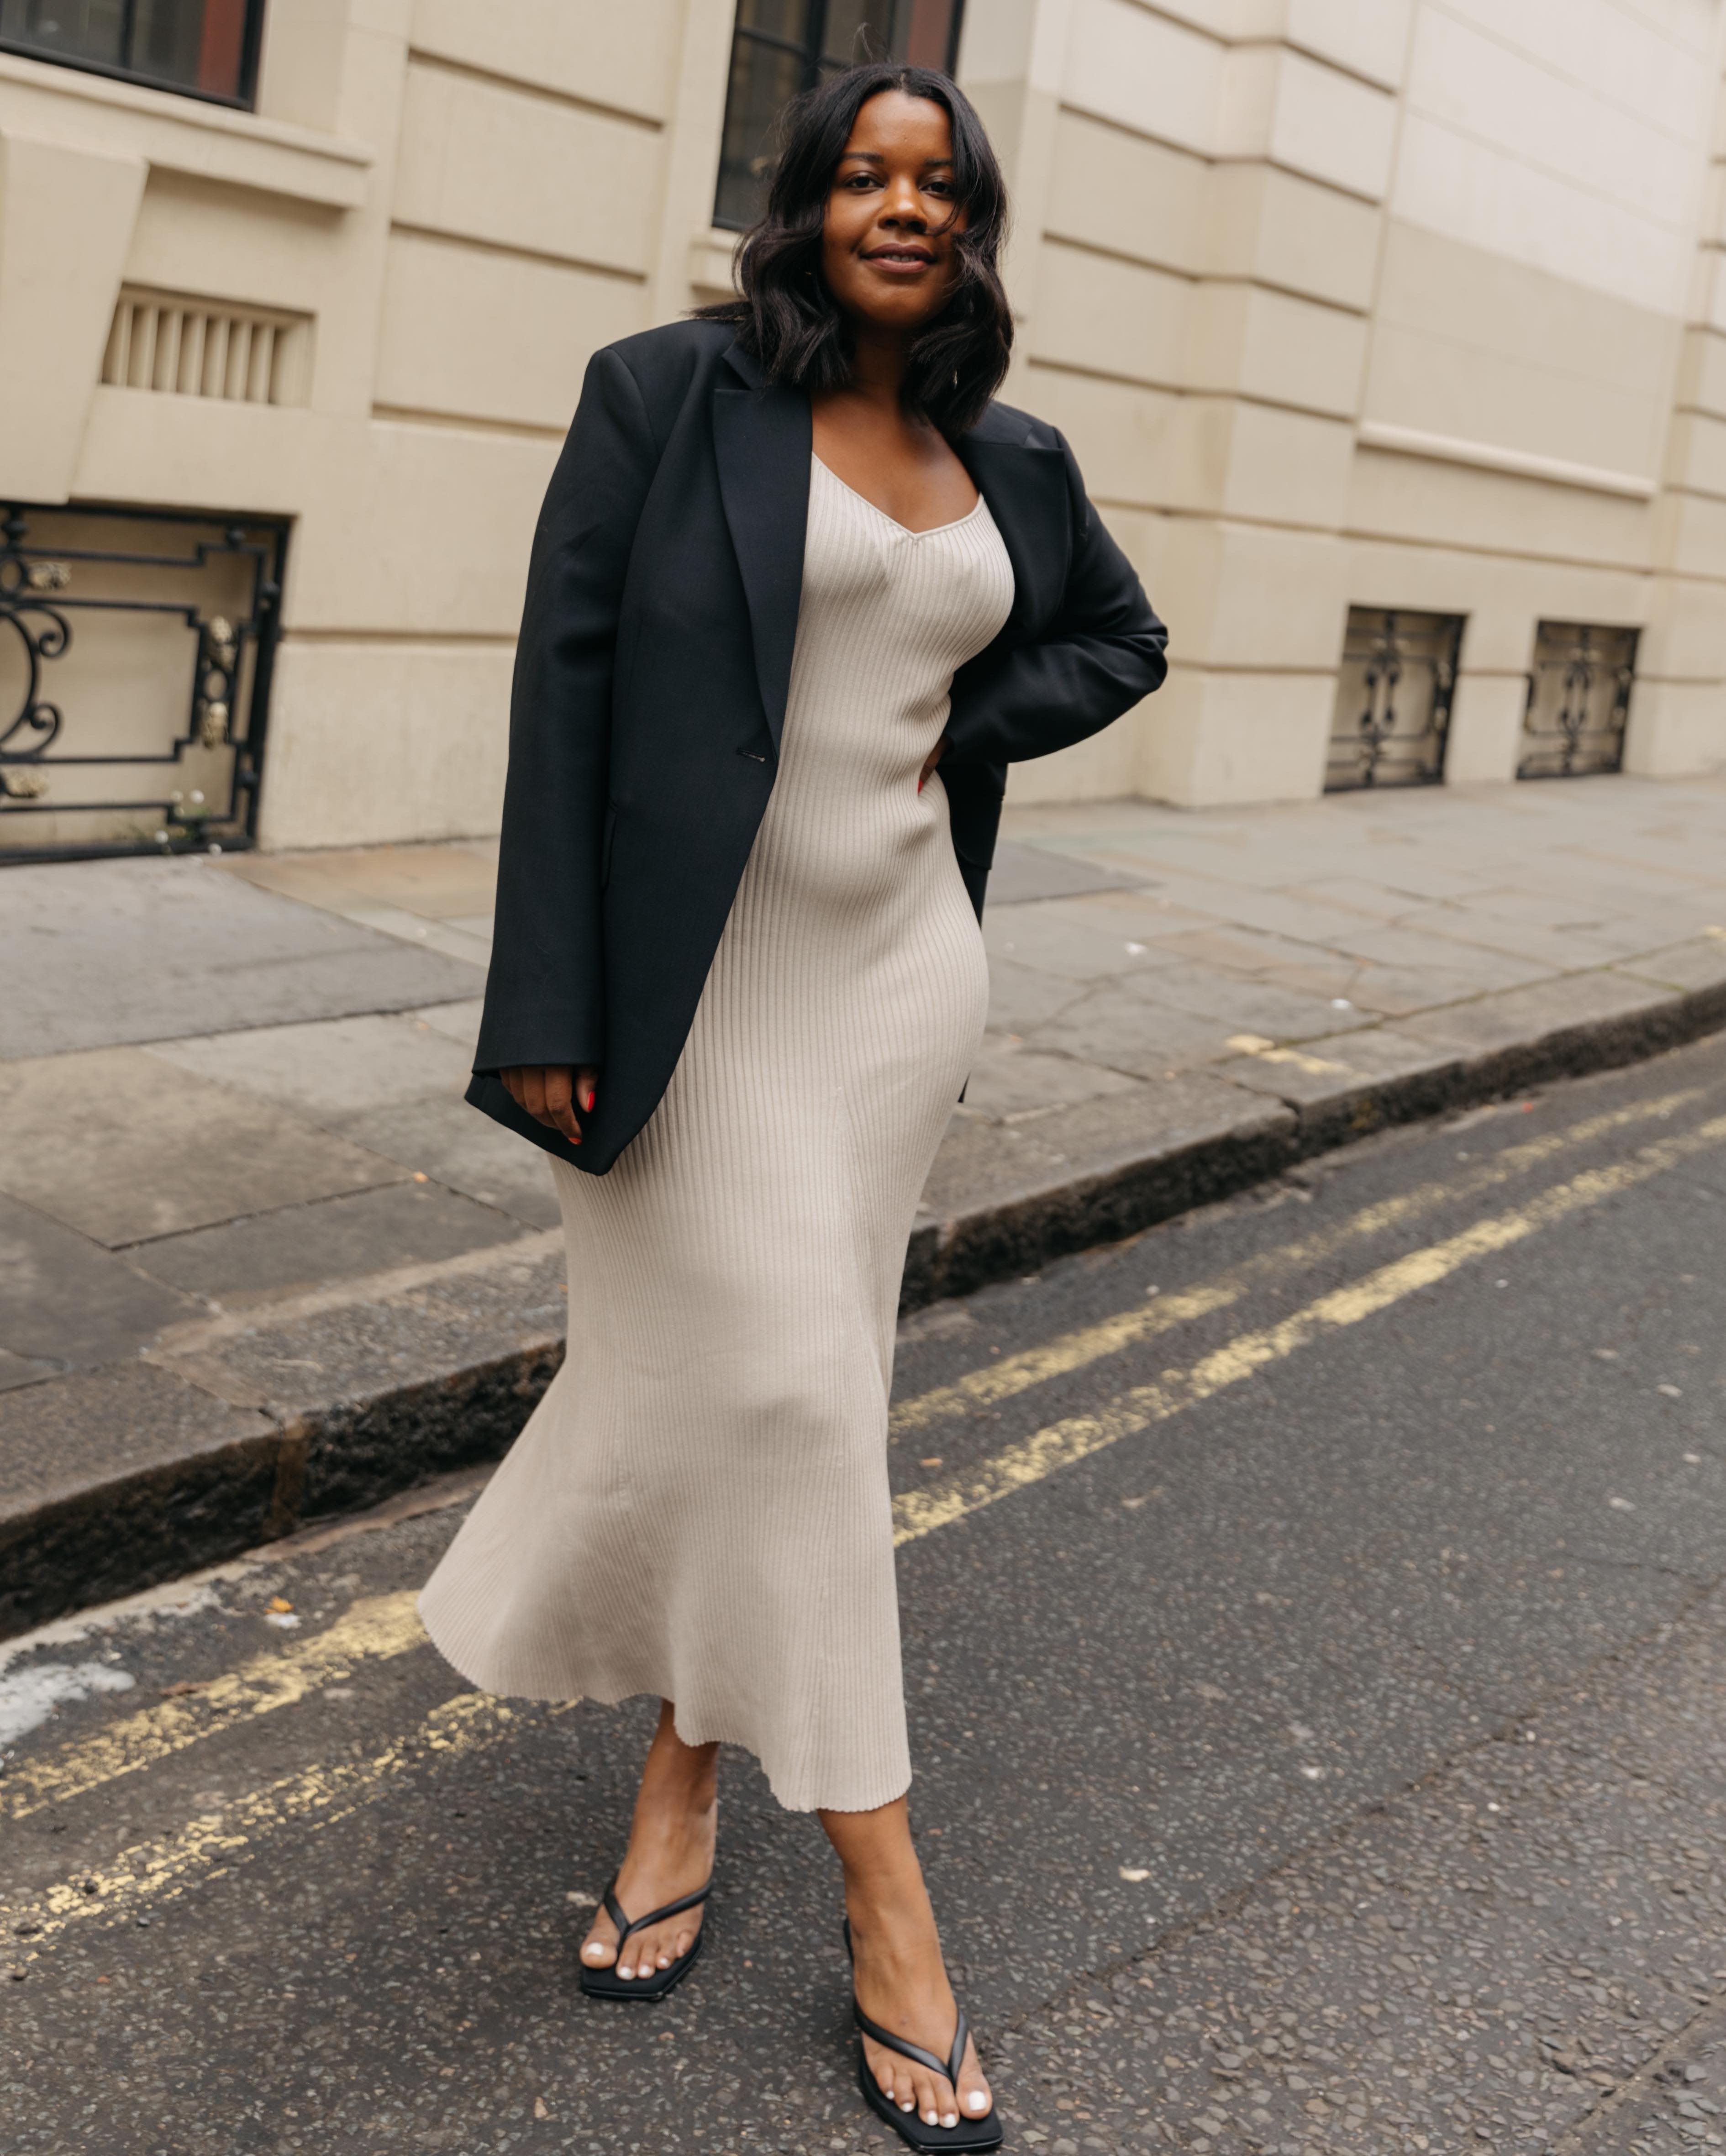 fashion influencer poses on the street in a black blazer, cream ribbed maxi dress, and thong flip flop heel sandals